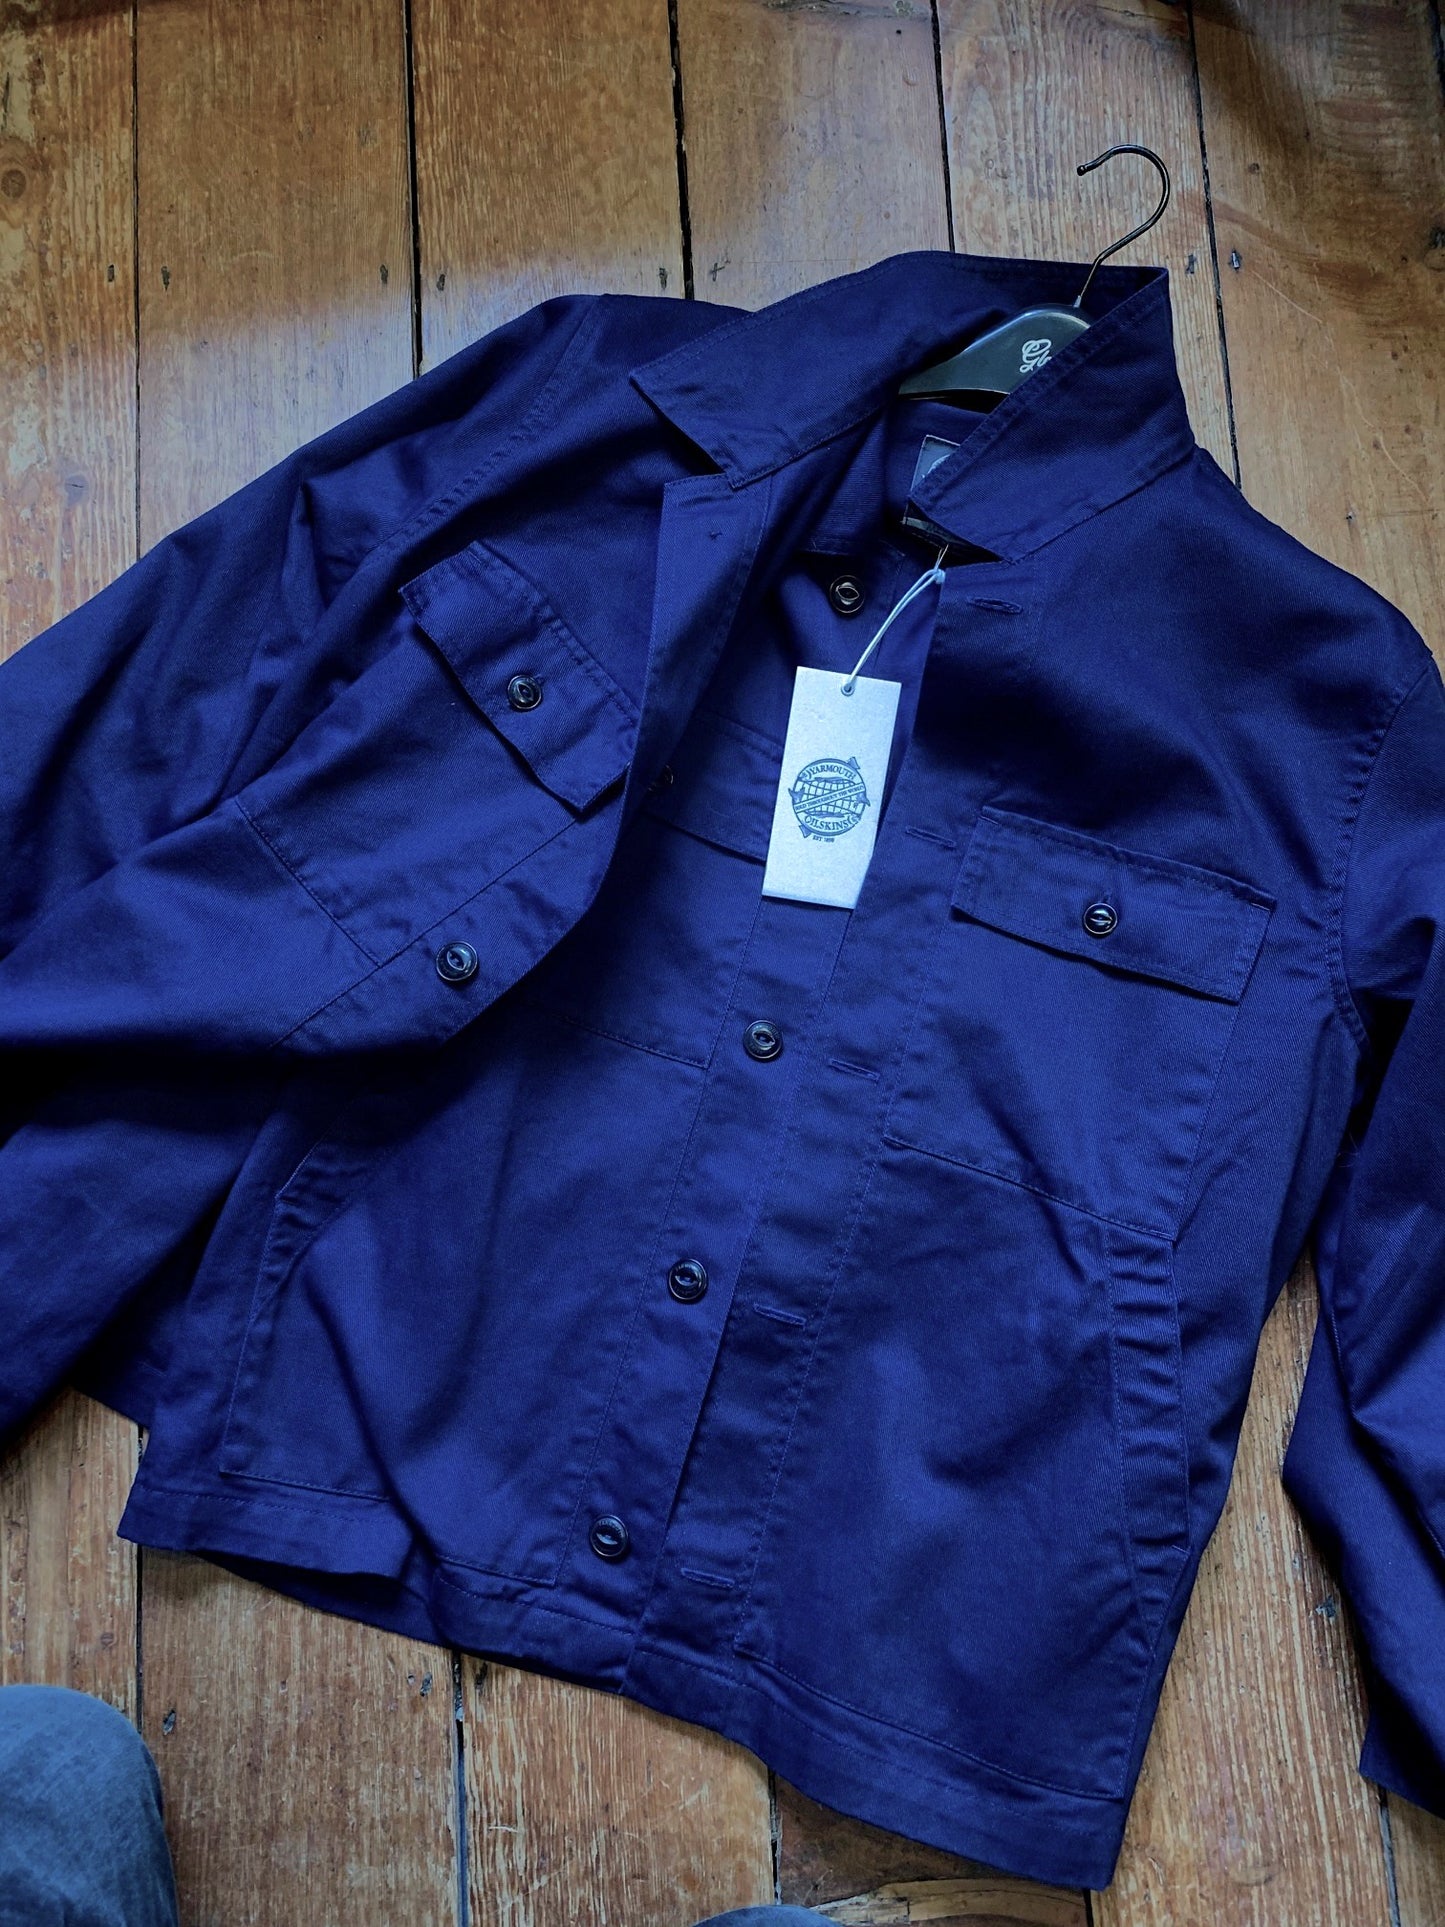 Navy workwear-style fisherman's jacket from independent UK brand Yarmouth Oilskins, featuring cotton composition, chest pockets and deep back yoke for ease of movement.